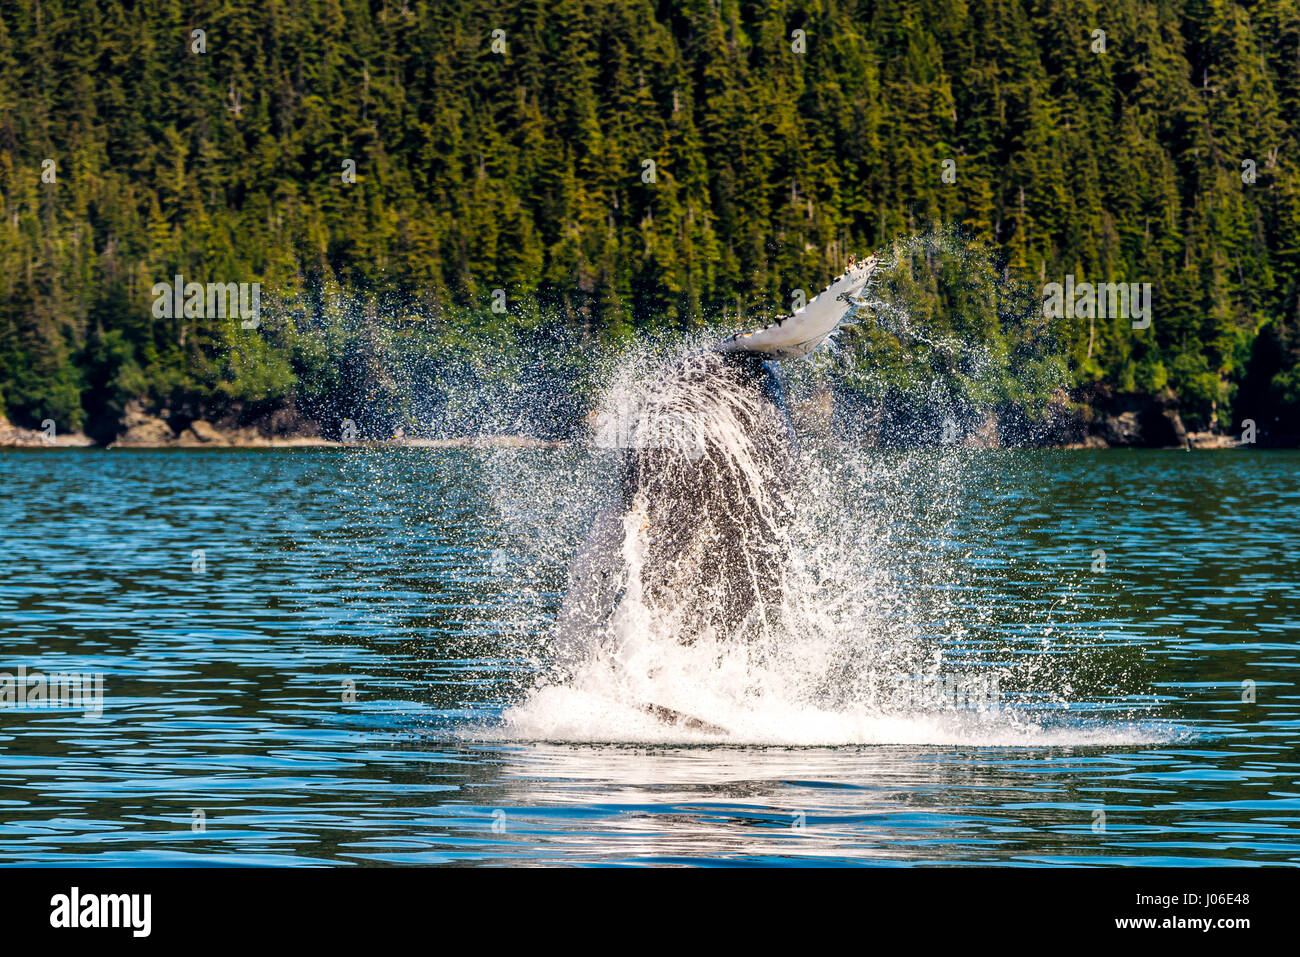 ONTARIO, CANADA: THE EXACT moment a leaping thirty-ton whale’s body is perfectly parallel with the surface of the water it is exploding from has been sensationally captured. Other pictures show the sequence of precisely how the Humpback whale broke the surface of the water, only to emerge from the waves at a high speed. Elementary school teacher Ian Stotesbury (37) from Ontario, Canada was lucky enough to spot the whale on a boat ride in Prince William Sound, Alaska. Stock Photo